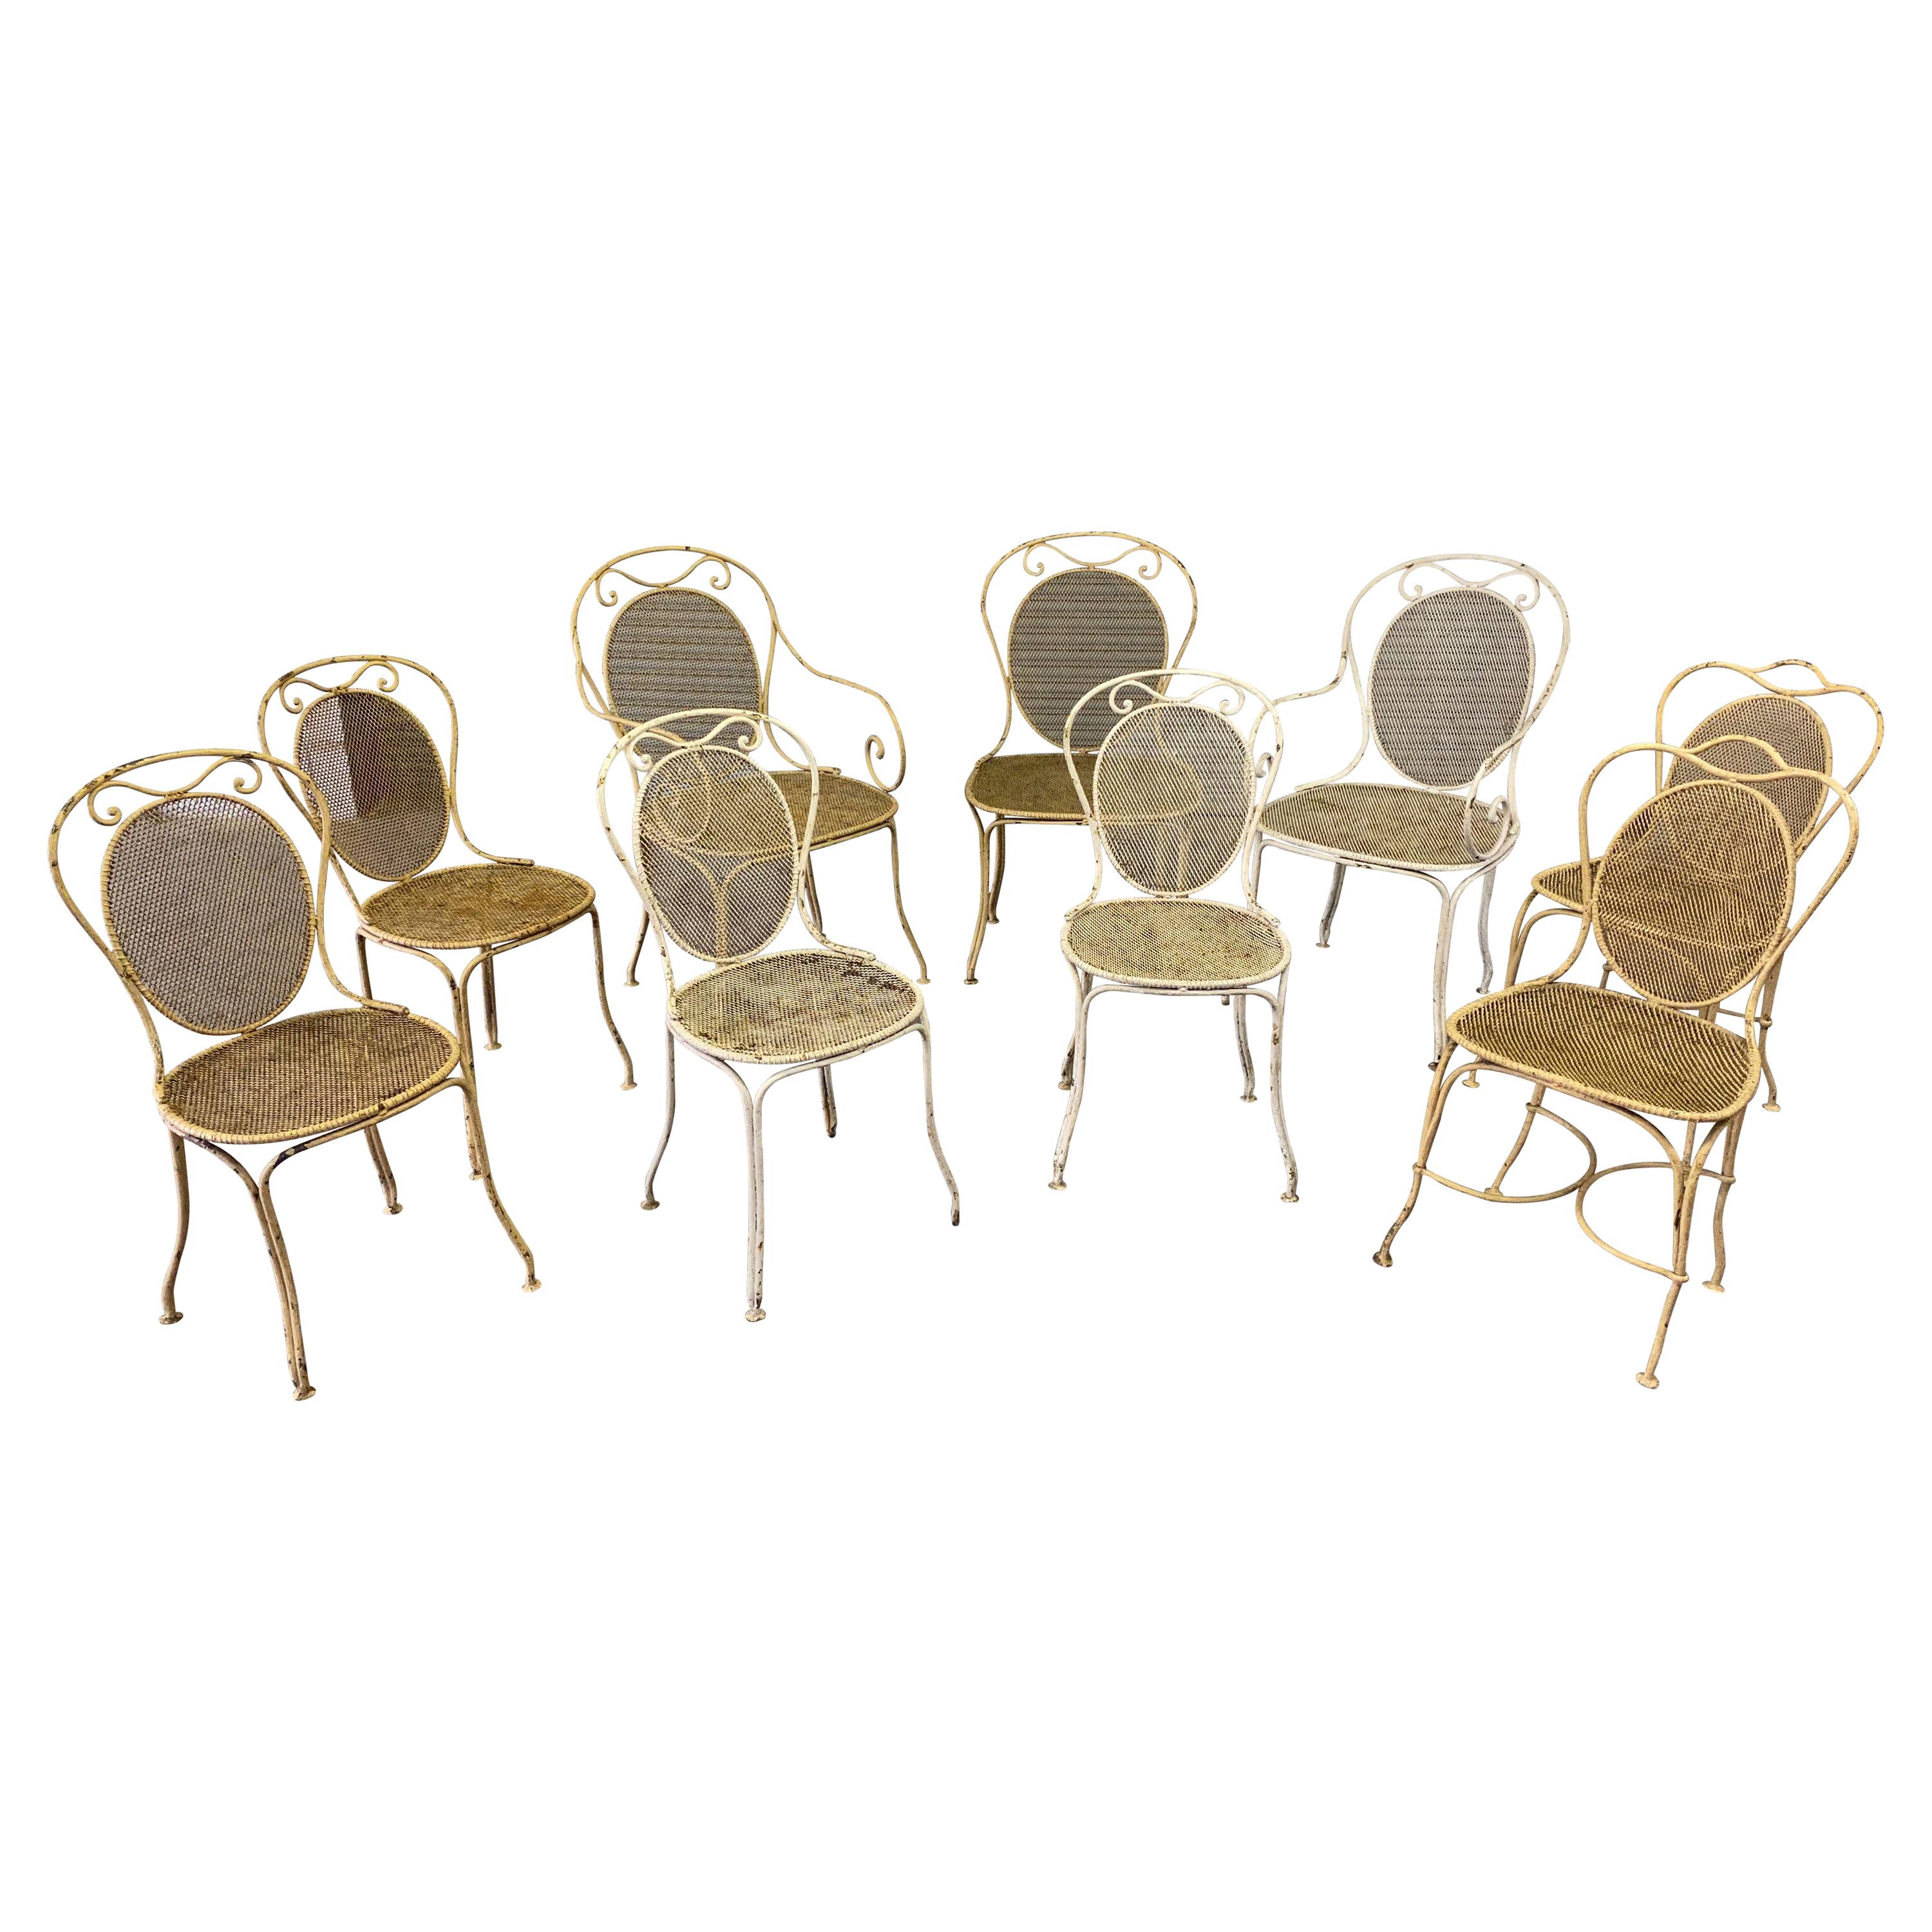 Set of Seven French Iron Garden Chairs